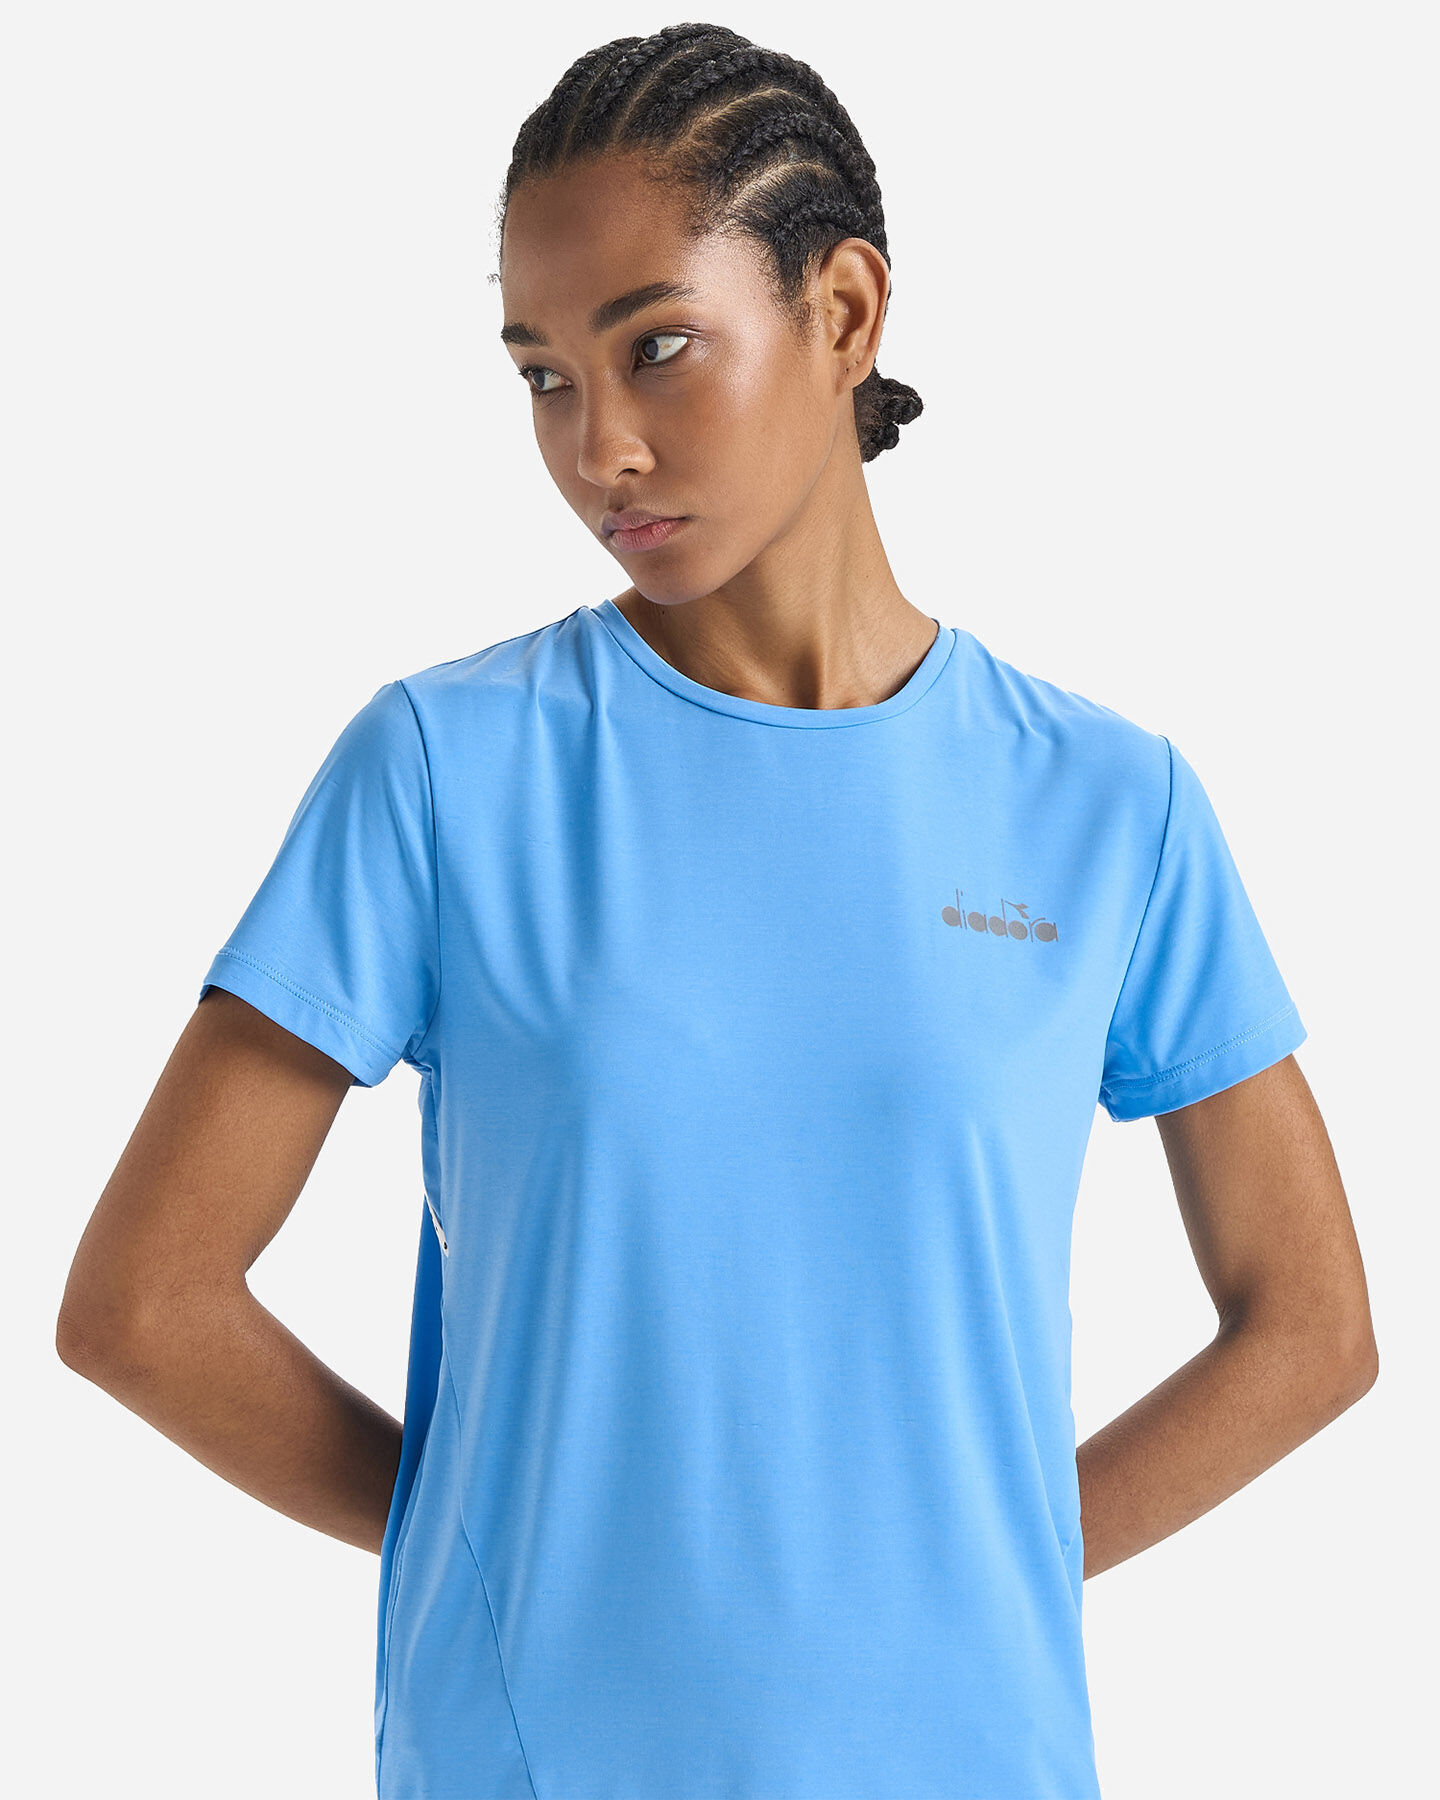  T-Shirt running DIADORA BE ONE W S5529693|65035|M scatto 3